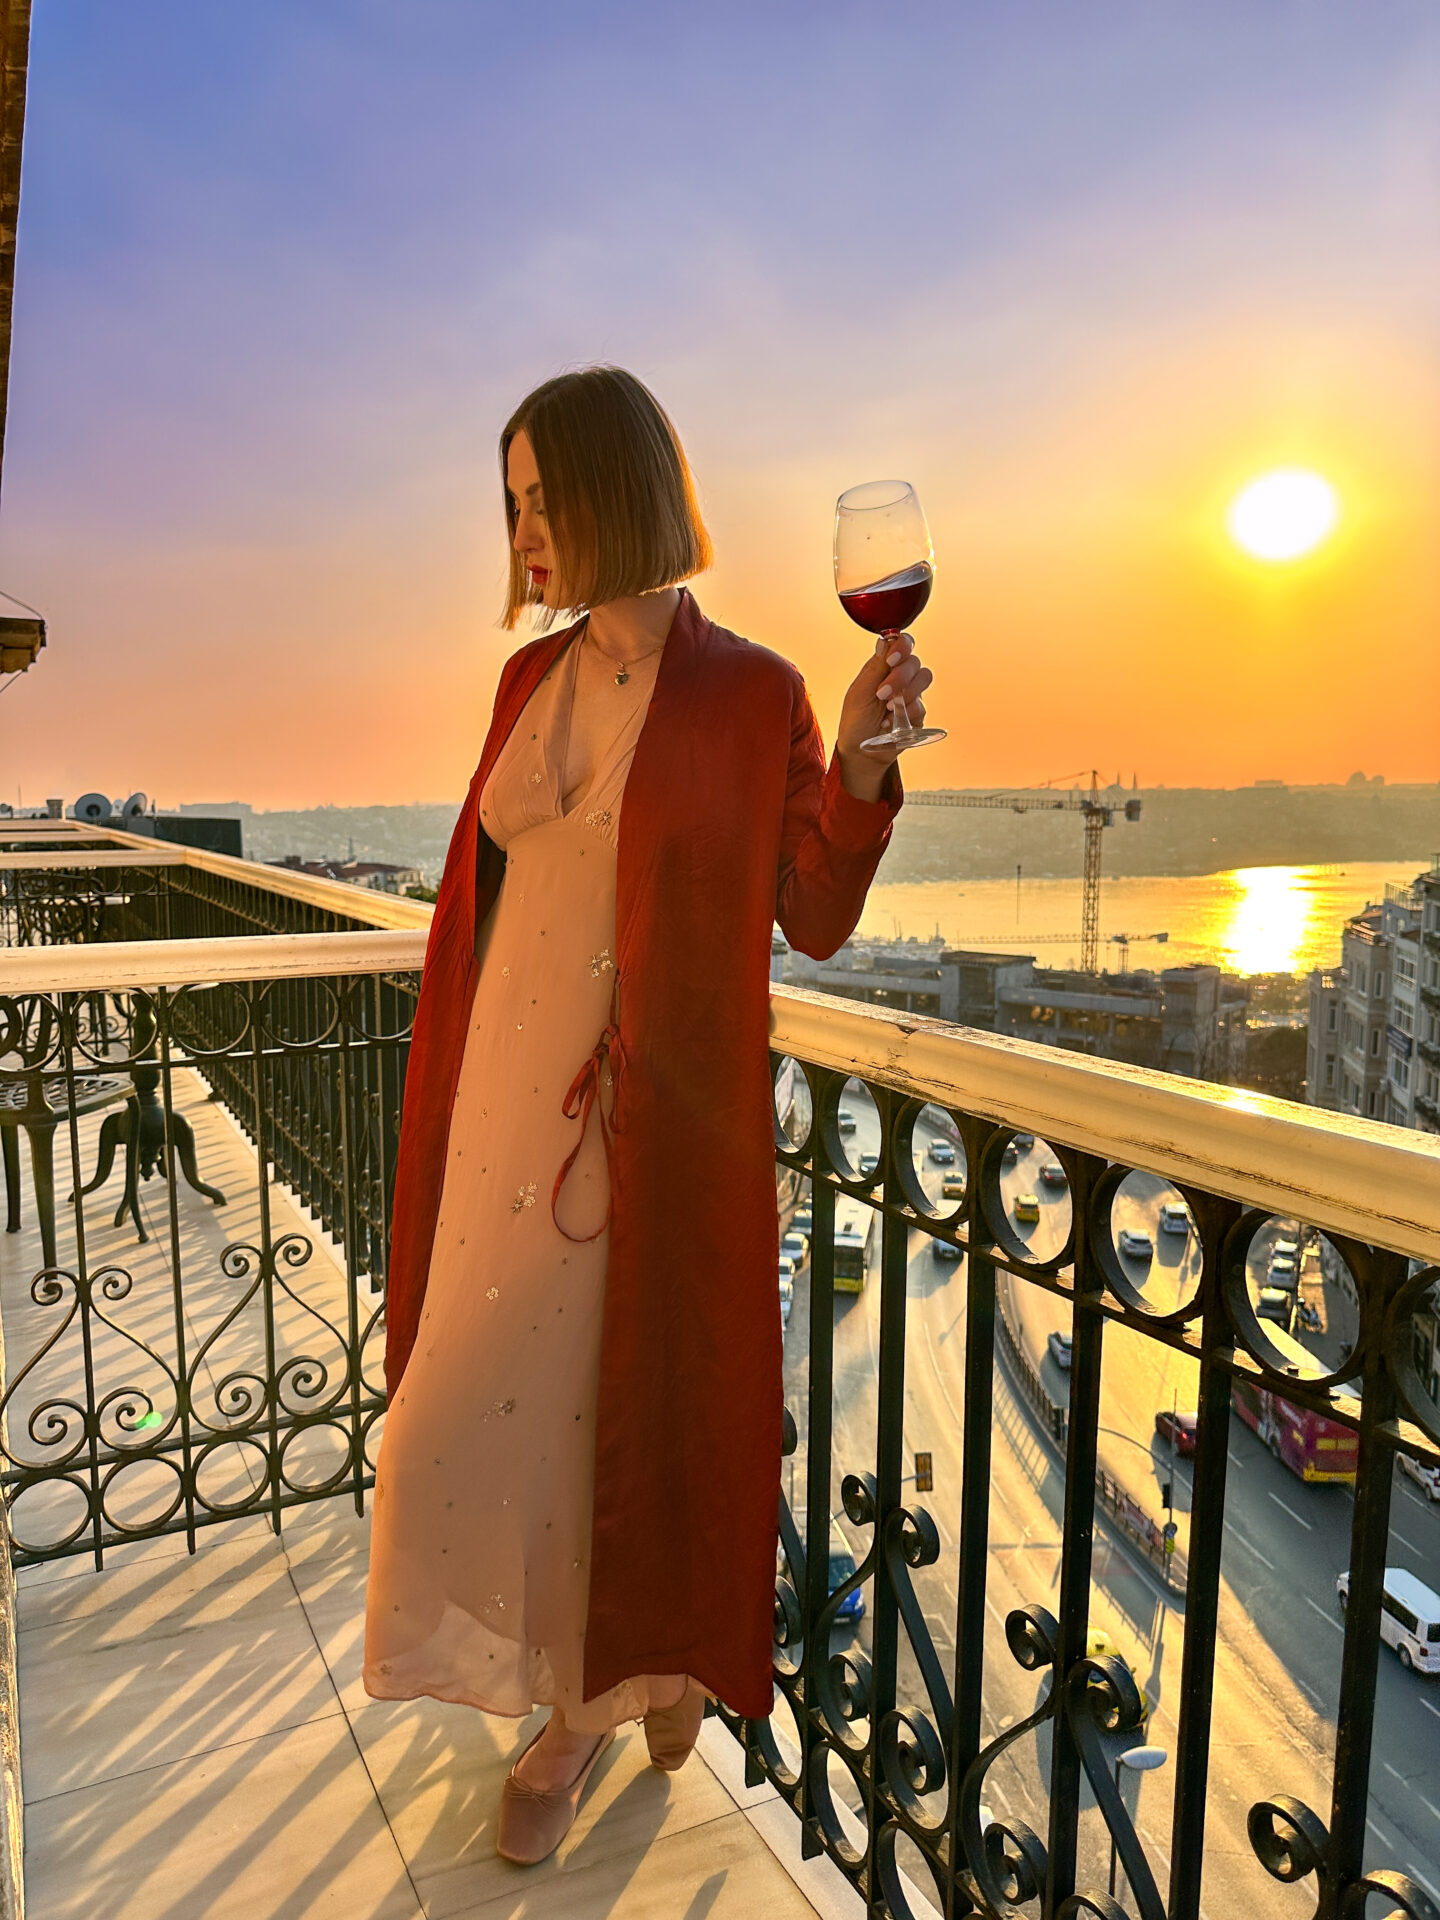 10 Fun Facts about Pera Palace Hotel Istanbul